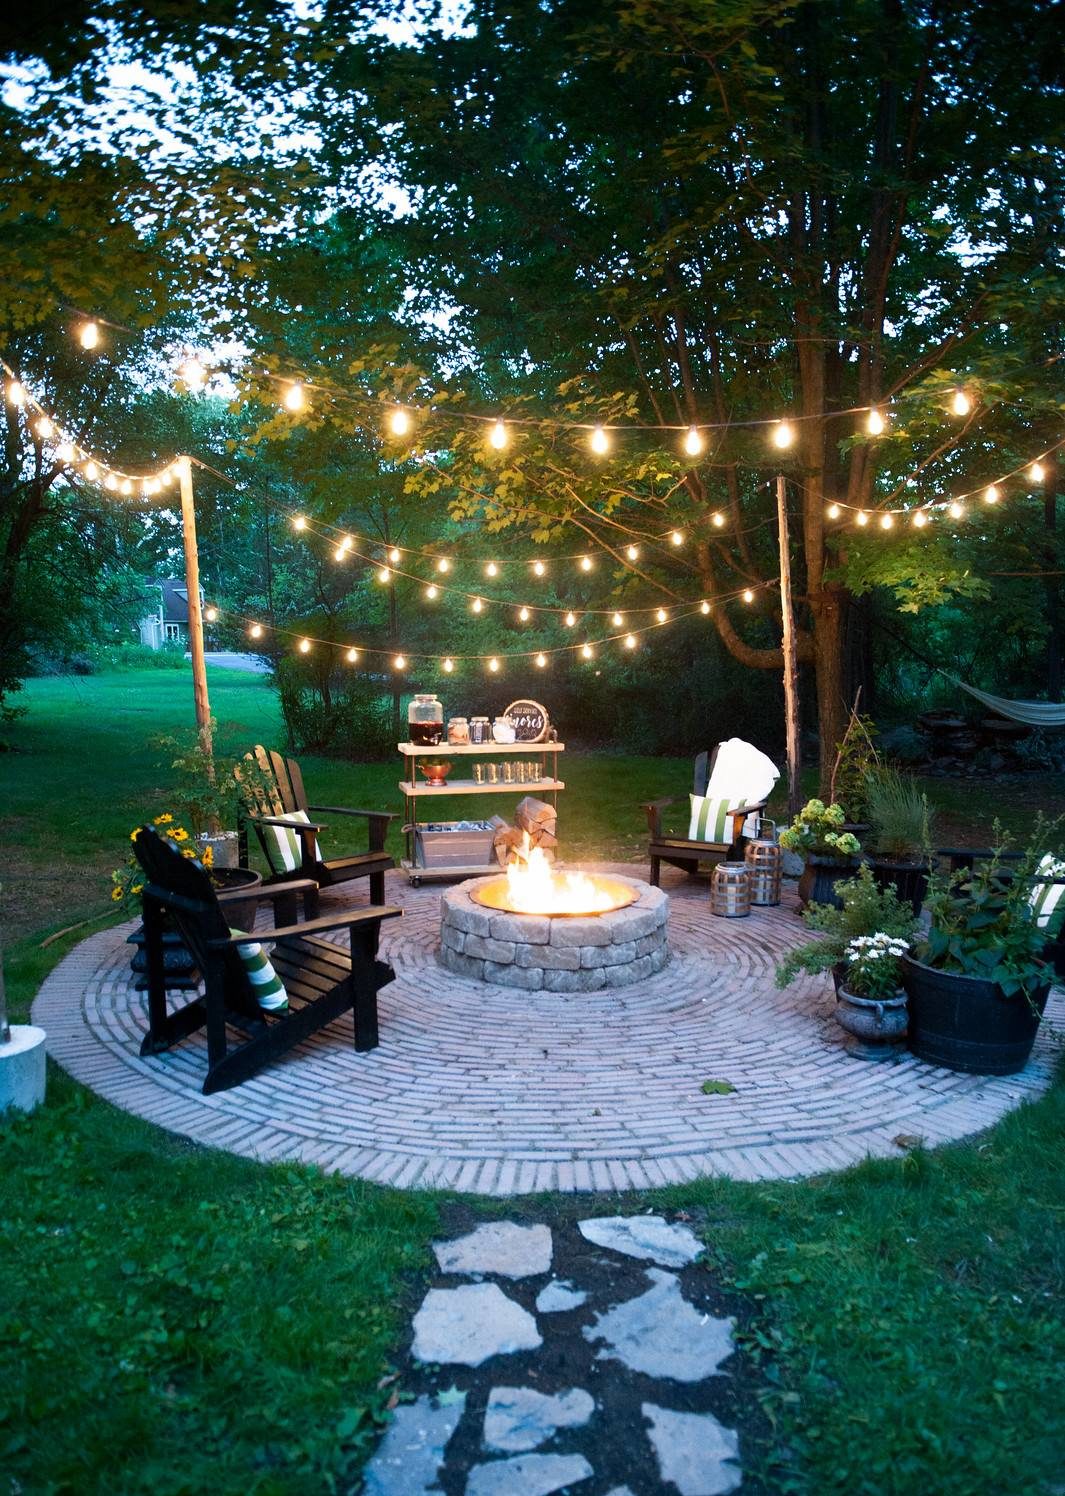 Outdoor fire put surrounded by black chairs, plants and dangling lights